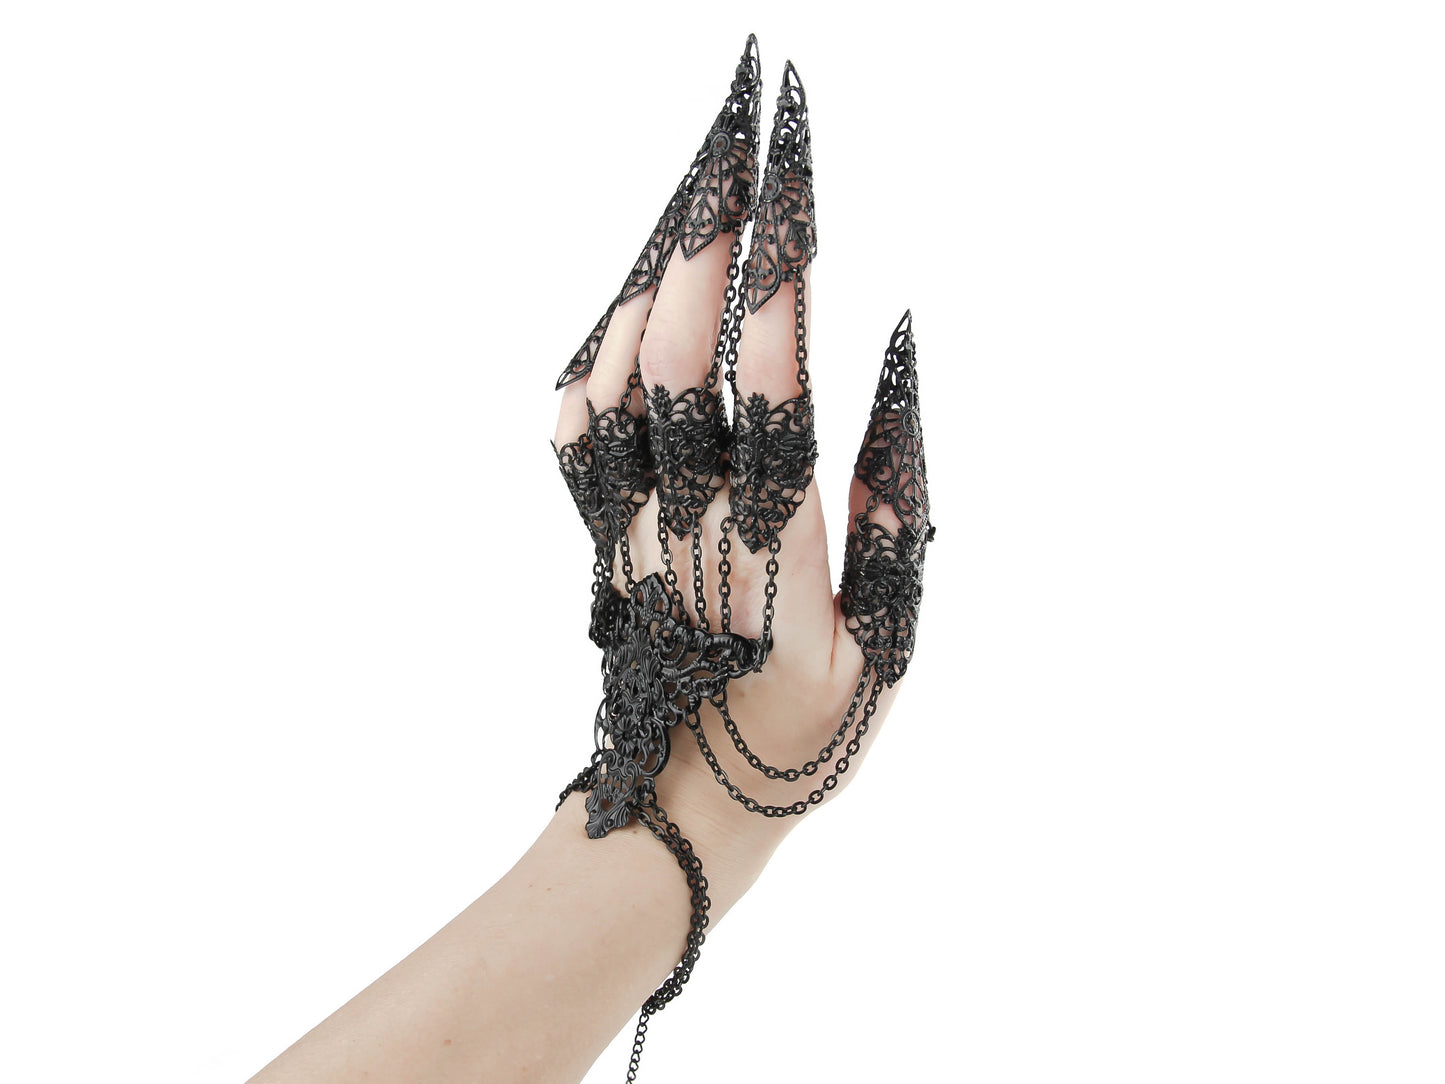 A fashion-forward black metal glove adorned with finger claw rings by Myril Jewels, epitomizing the essence of neo-gothic style. This striking accessory merges dark avant-garde aesthetics with bold, gothic-chic flair, perfect for Halloween, rave parties, or as a unique gift for goth enthusiasts.